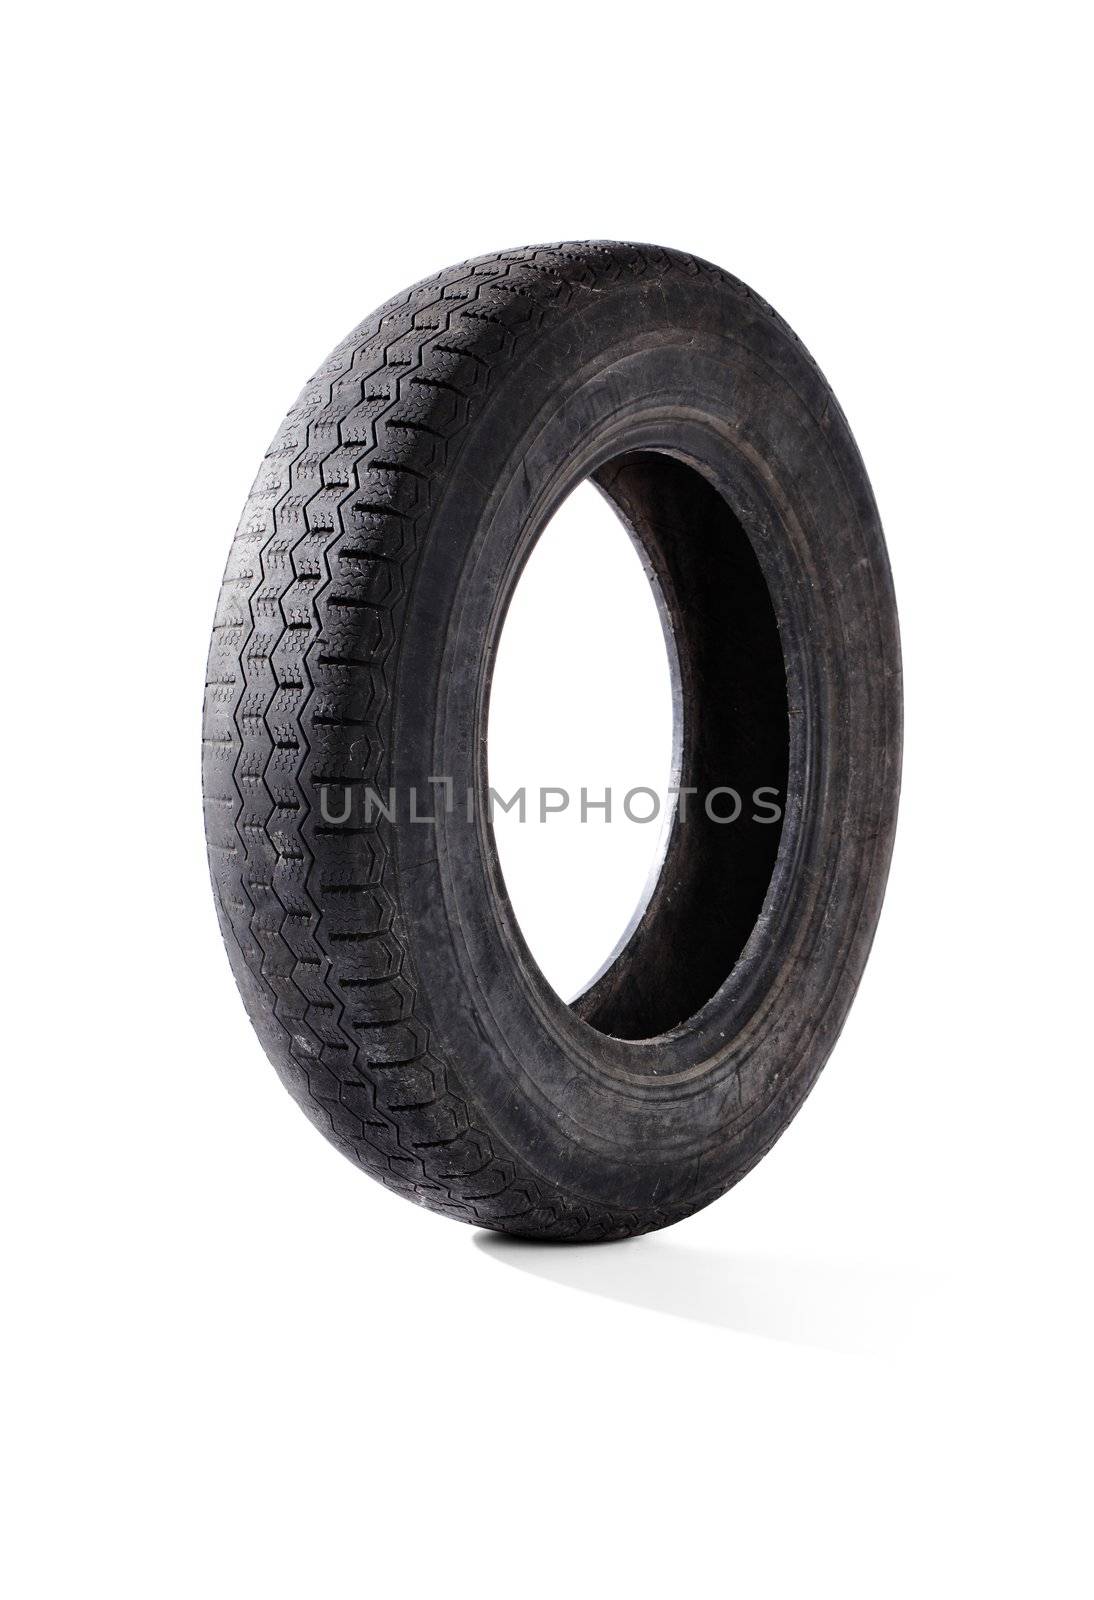 Old worn and weathered car tyre on white with natural shadow